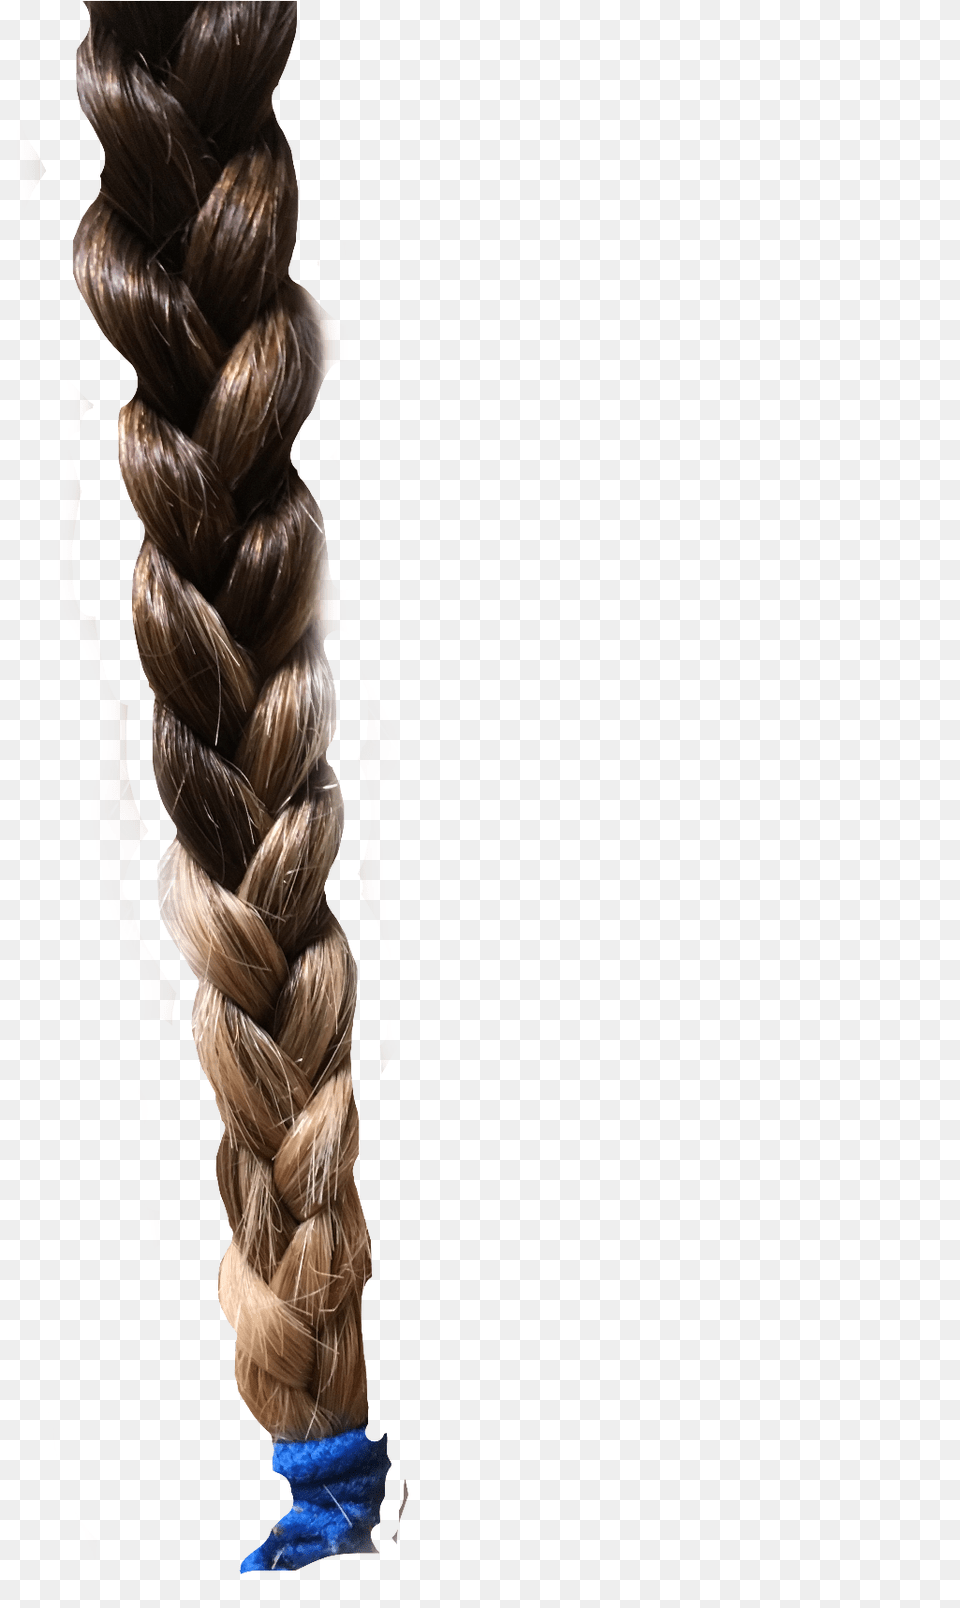 Download Free Hd Hair Braid Ombre Interesting Transparent Braid, Person, Rope Png Image